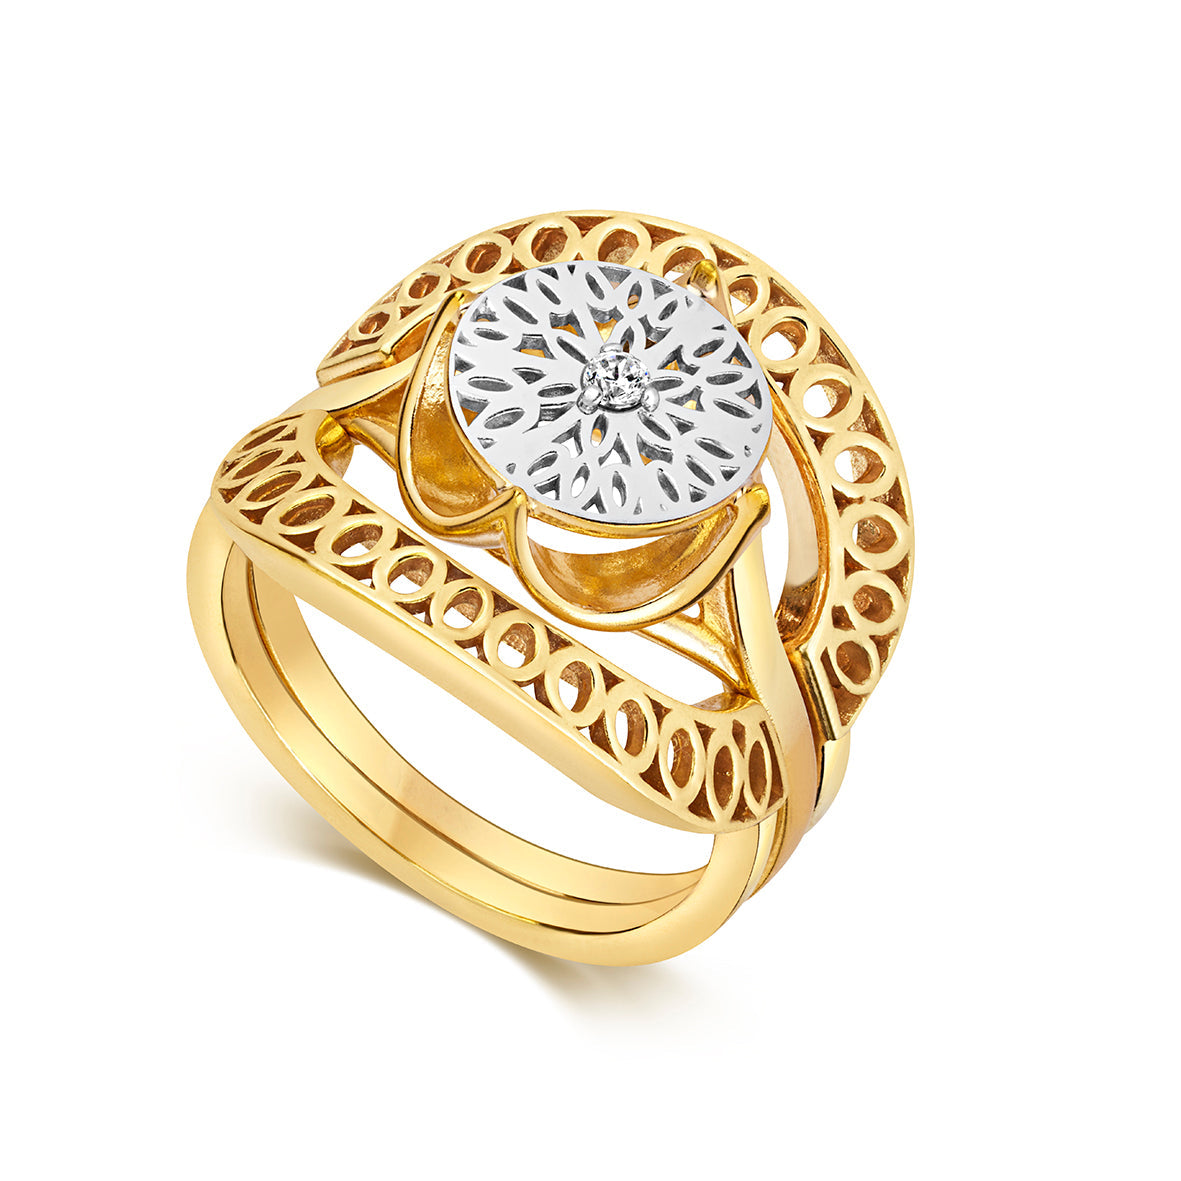 Seville Crown Ring, Gold and Silver